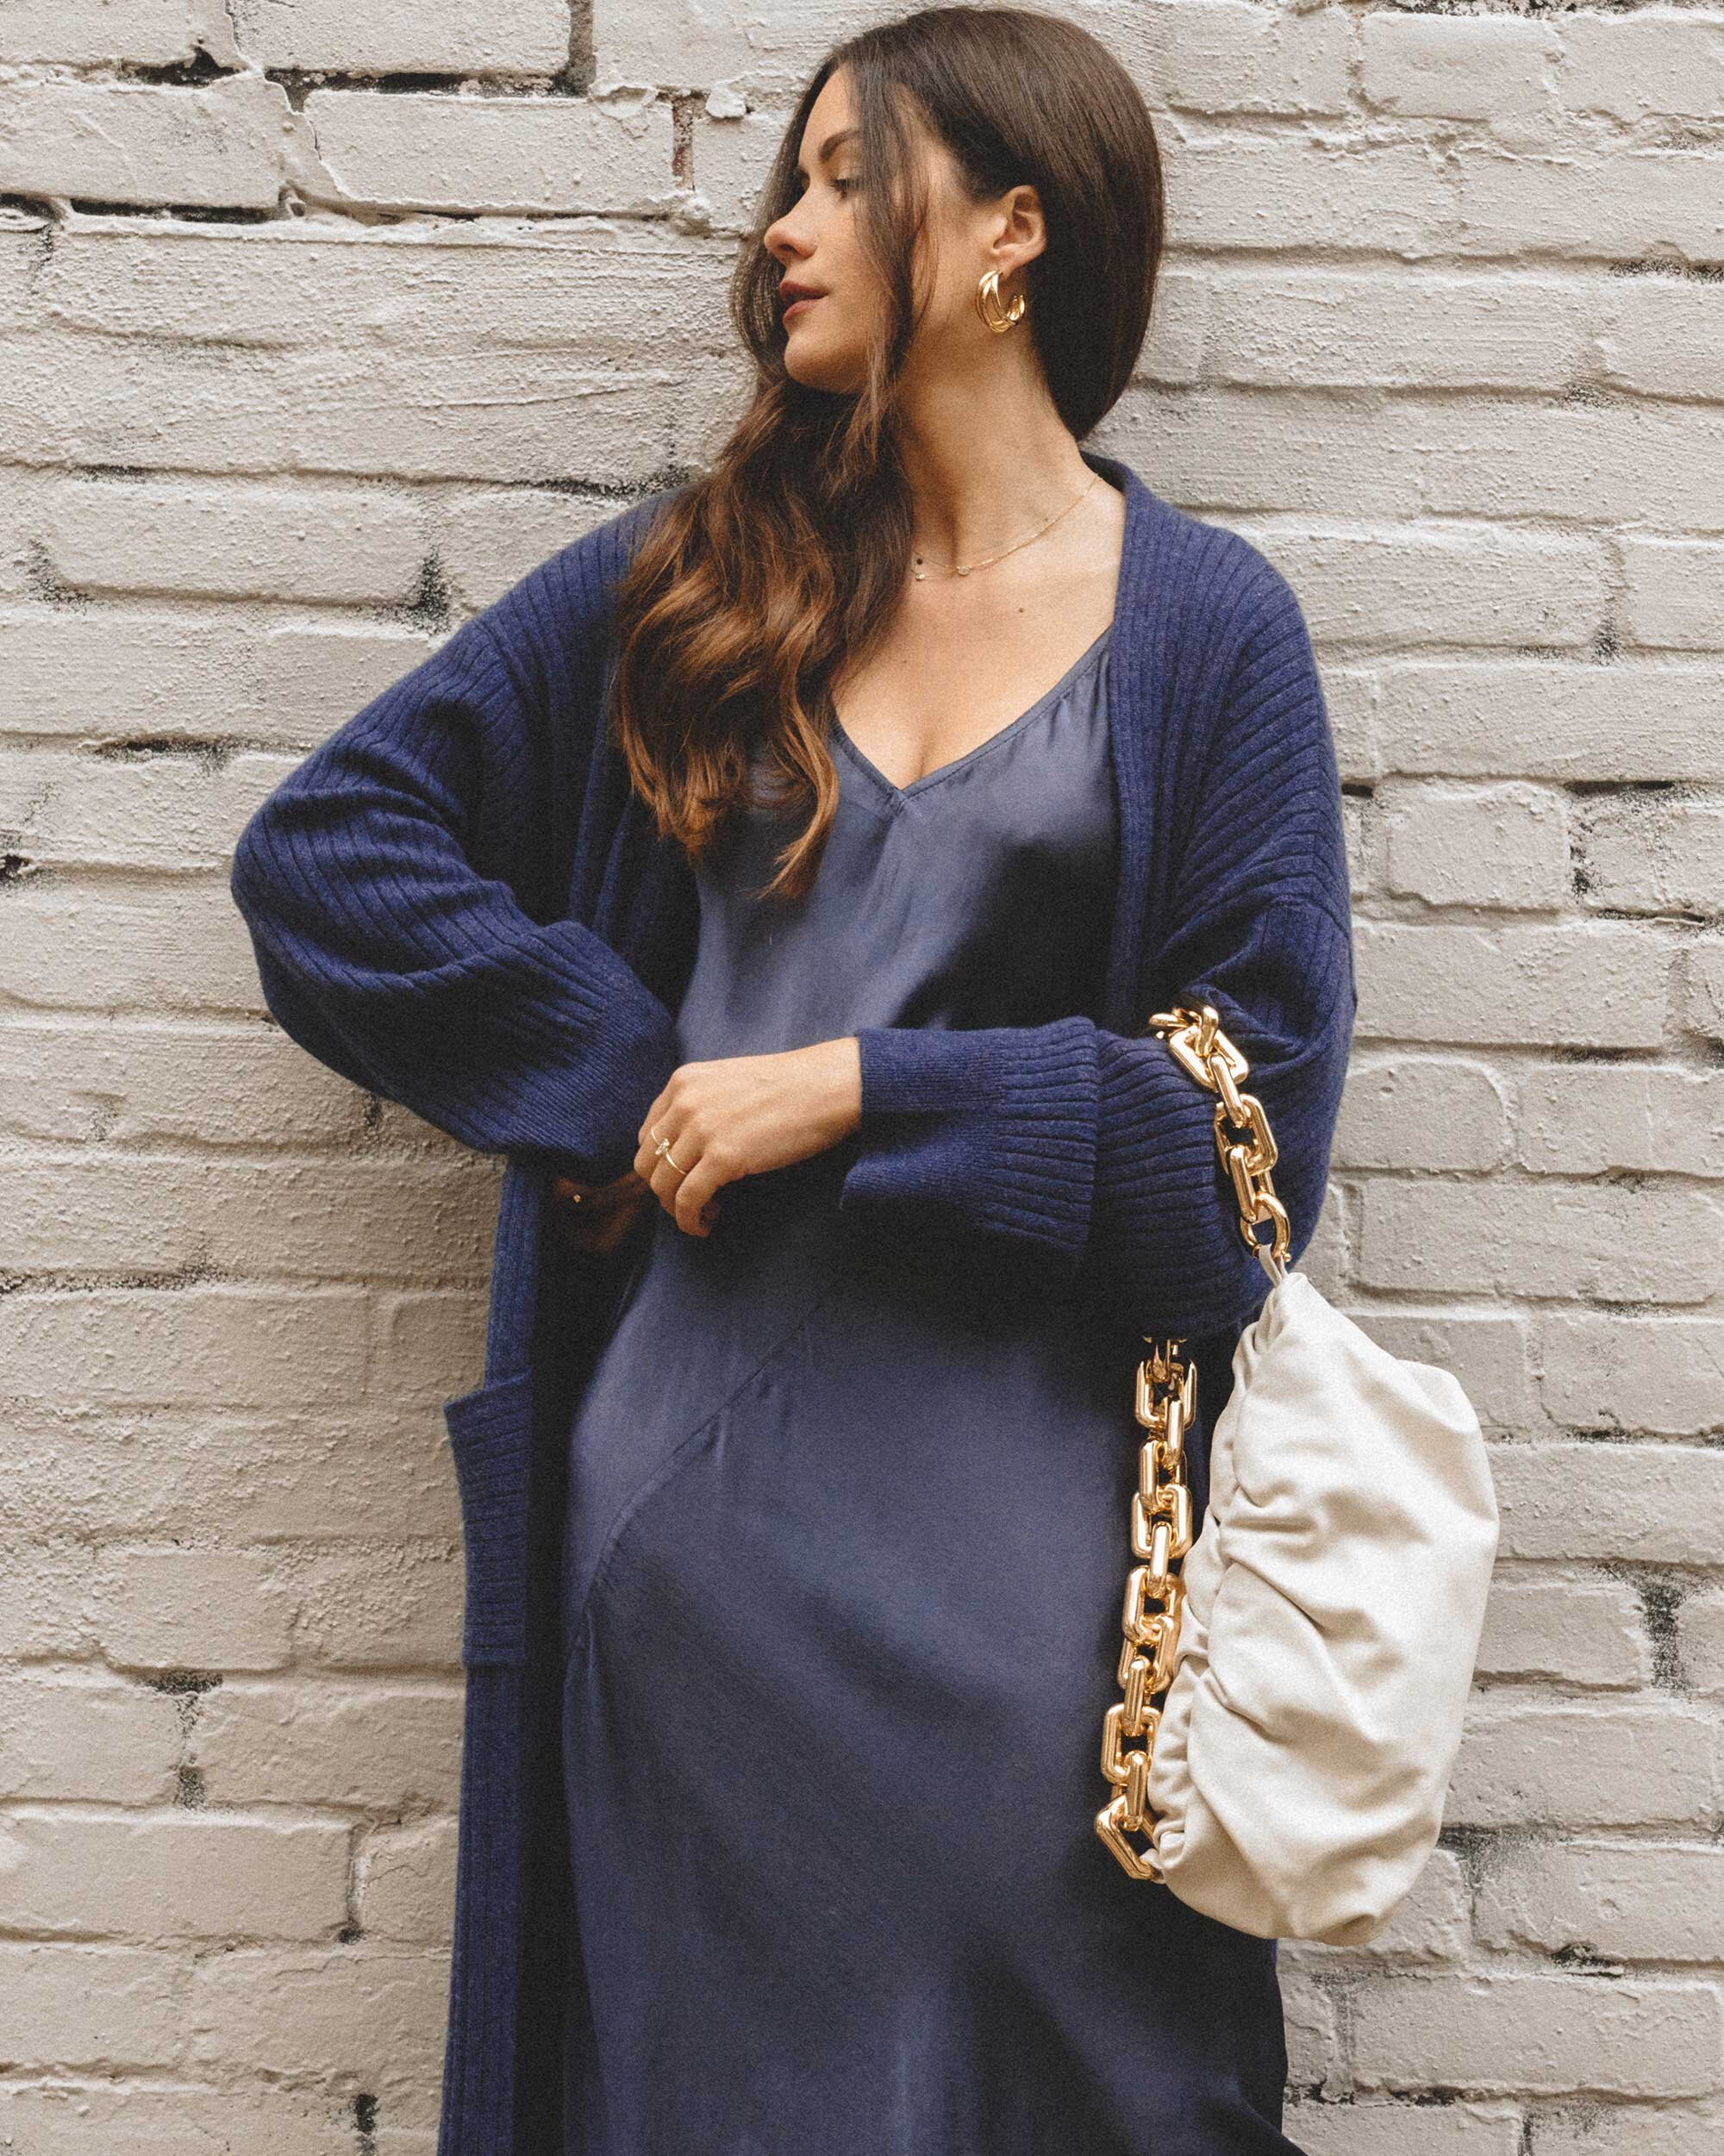 How to style a dress for winter. Sarah Butler of @sarahchristine wearing Line and Dot navy silk satin dress, Sablyn Long Cashmere Sweater, and Bottega Veneta The Chain Pouch Leather Clutch in Seattle, Washington -3.jpg